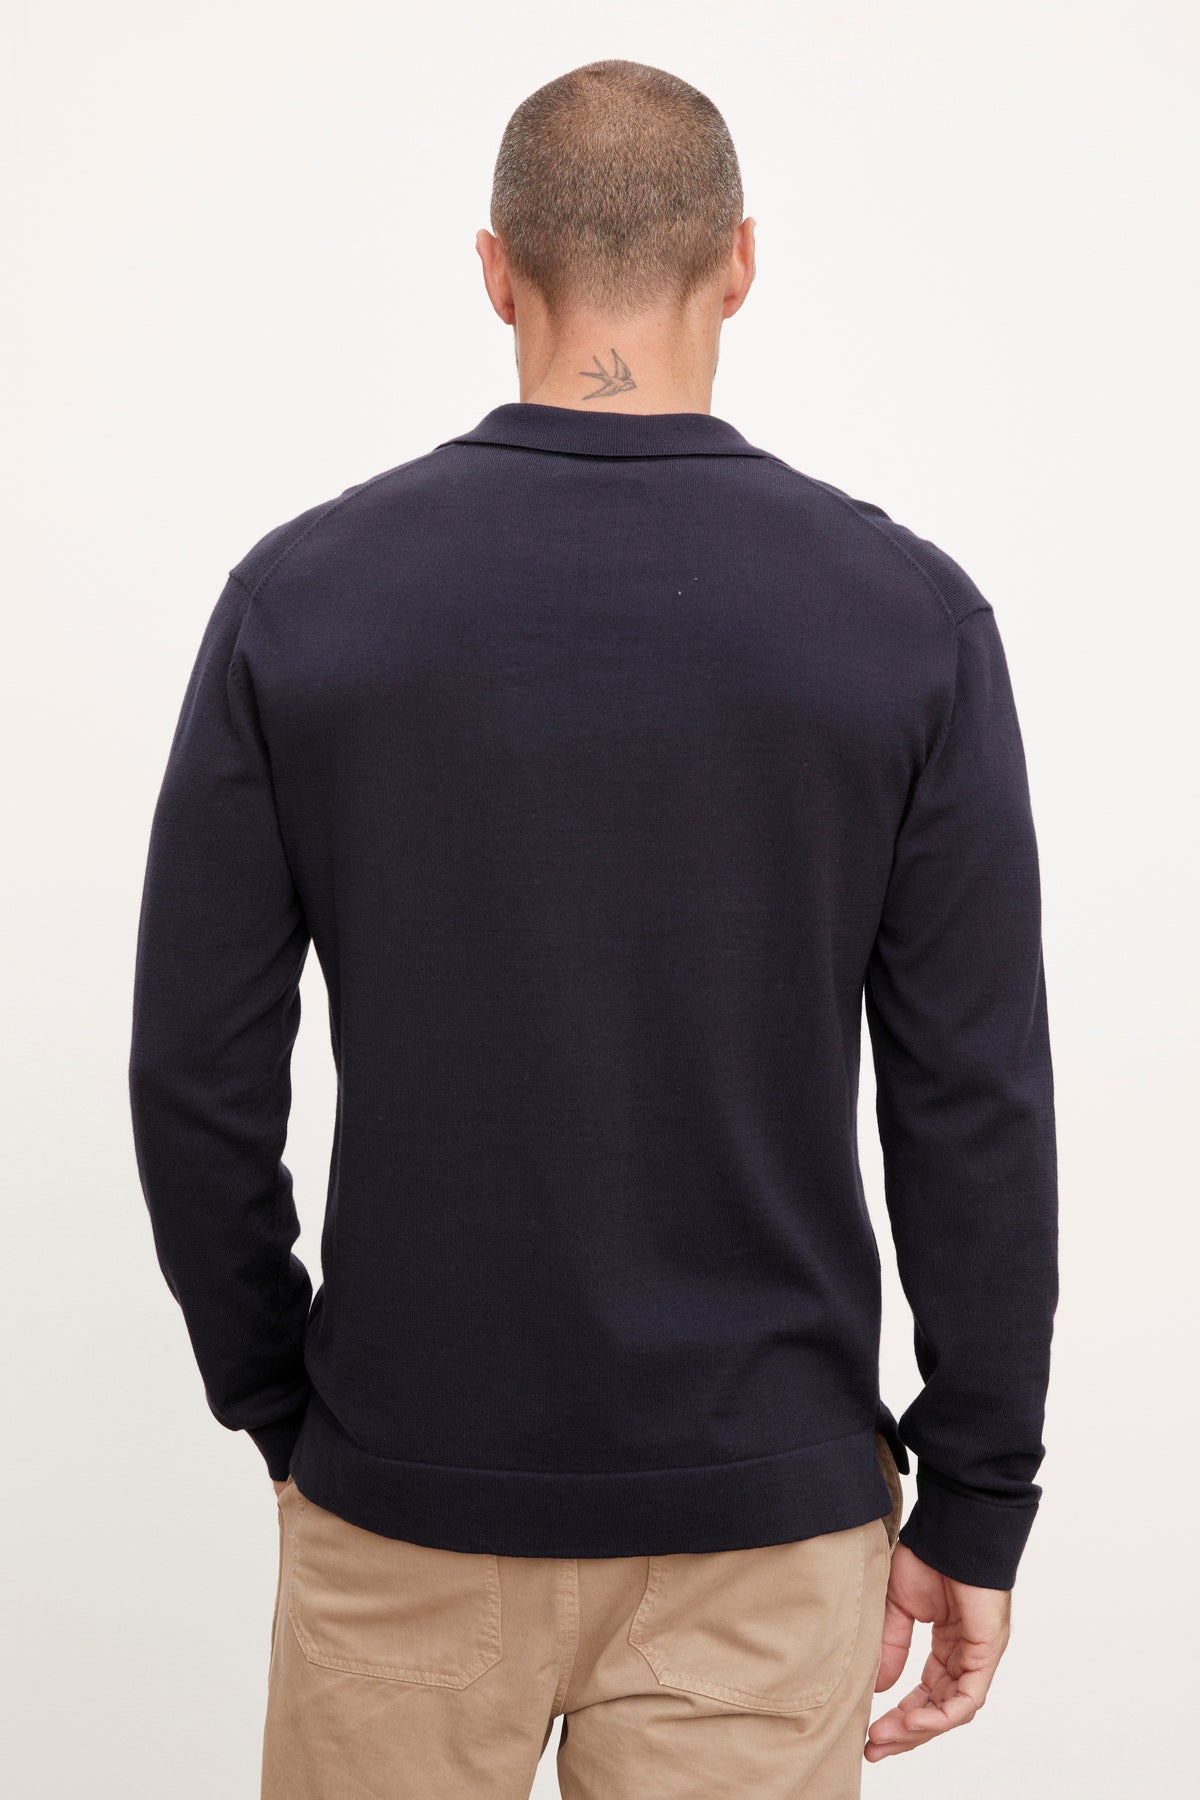 The back view of a man wearing a Velvet by Graham & Spencer navy sweater and khaki pants.-36009013739713